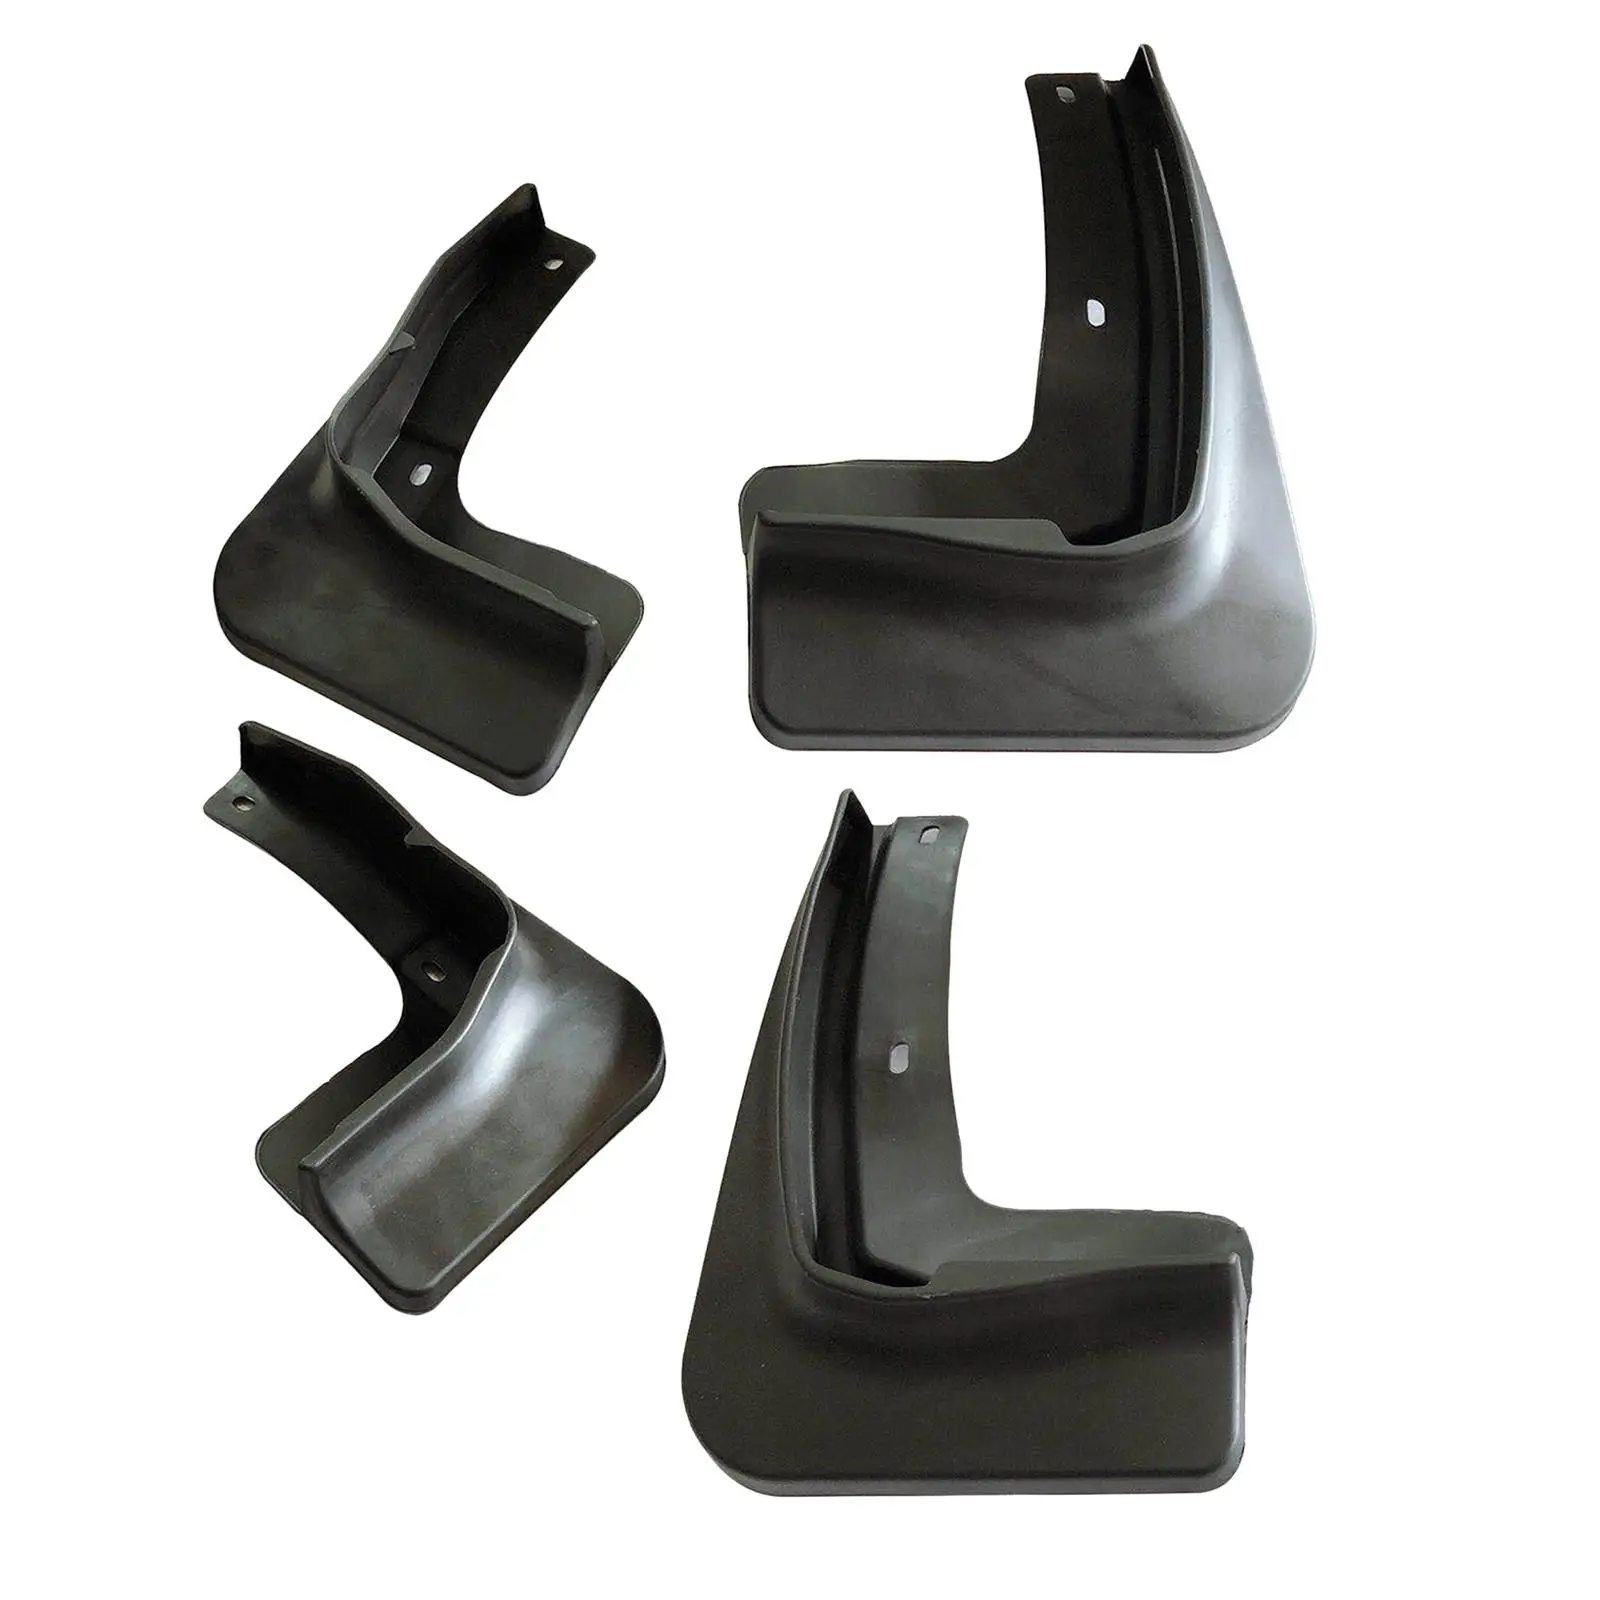 4 Pieces Car Mudguard Durable Mudflaps Accessories for Byd Yuan Plus